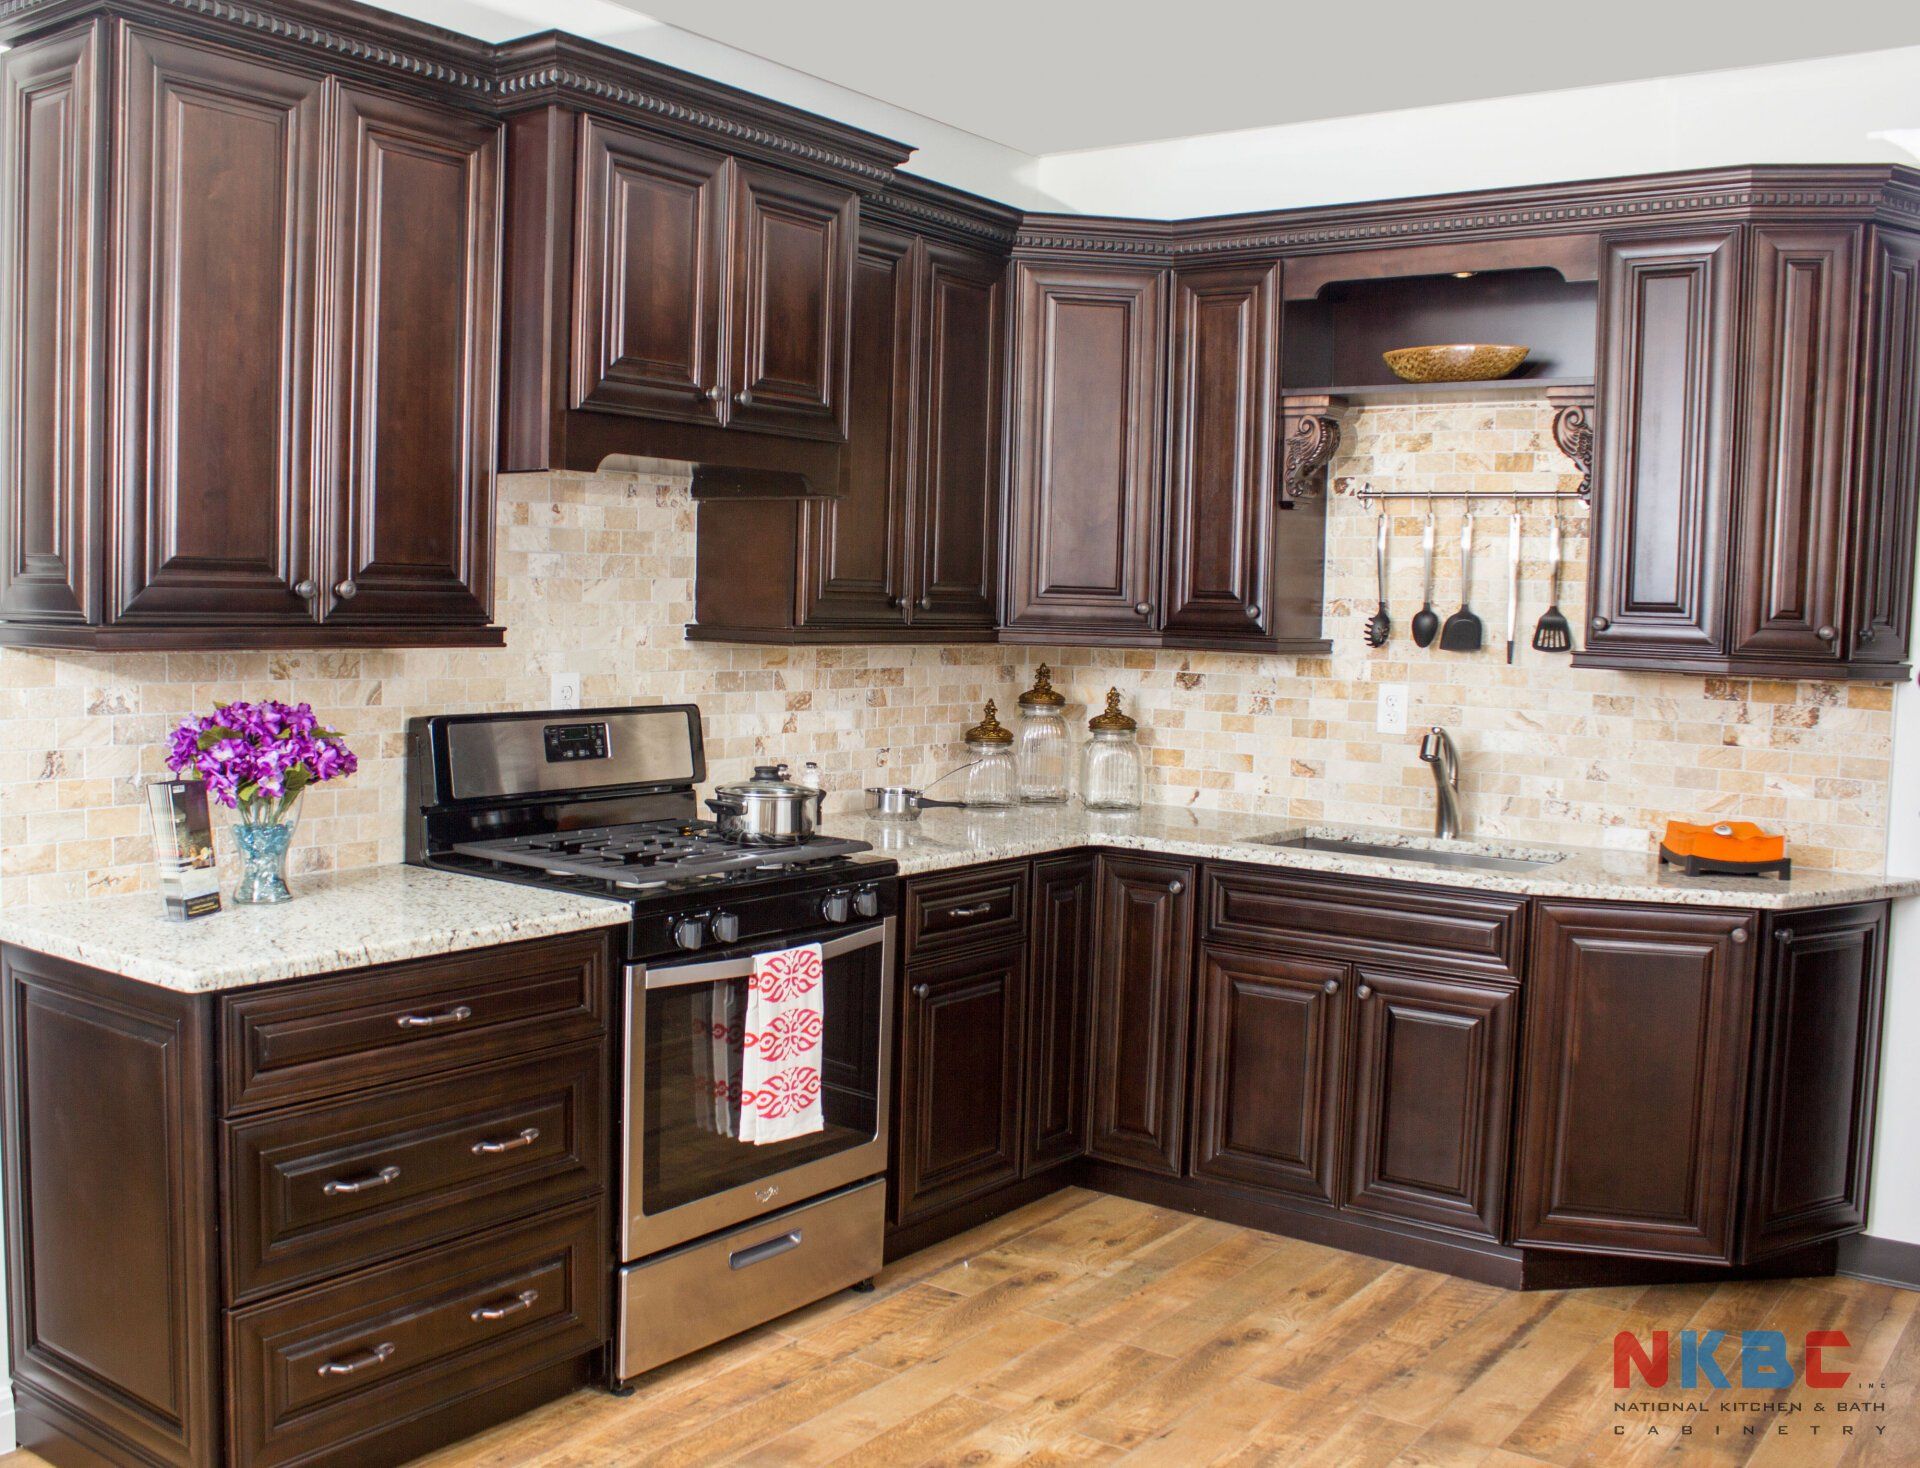 national kitchen and bath cabinetry romeoville